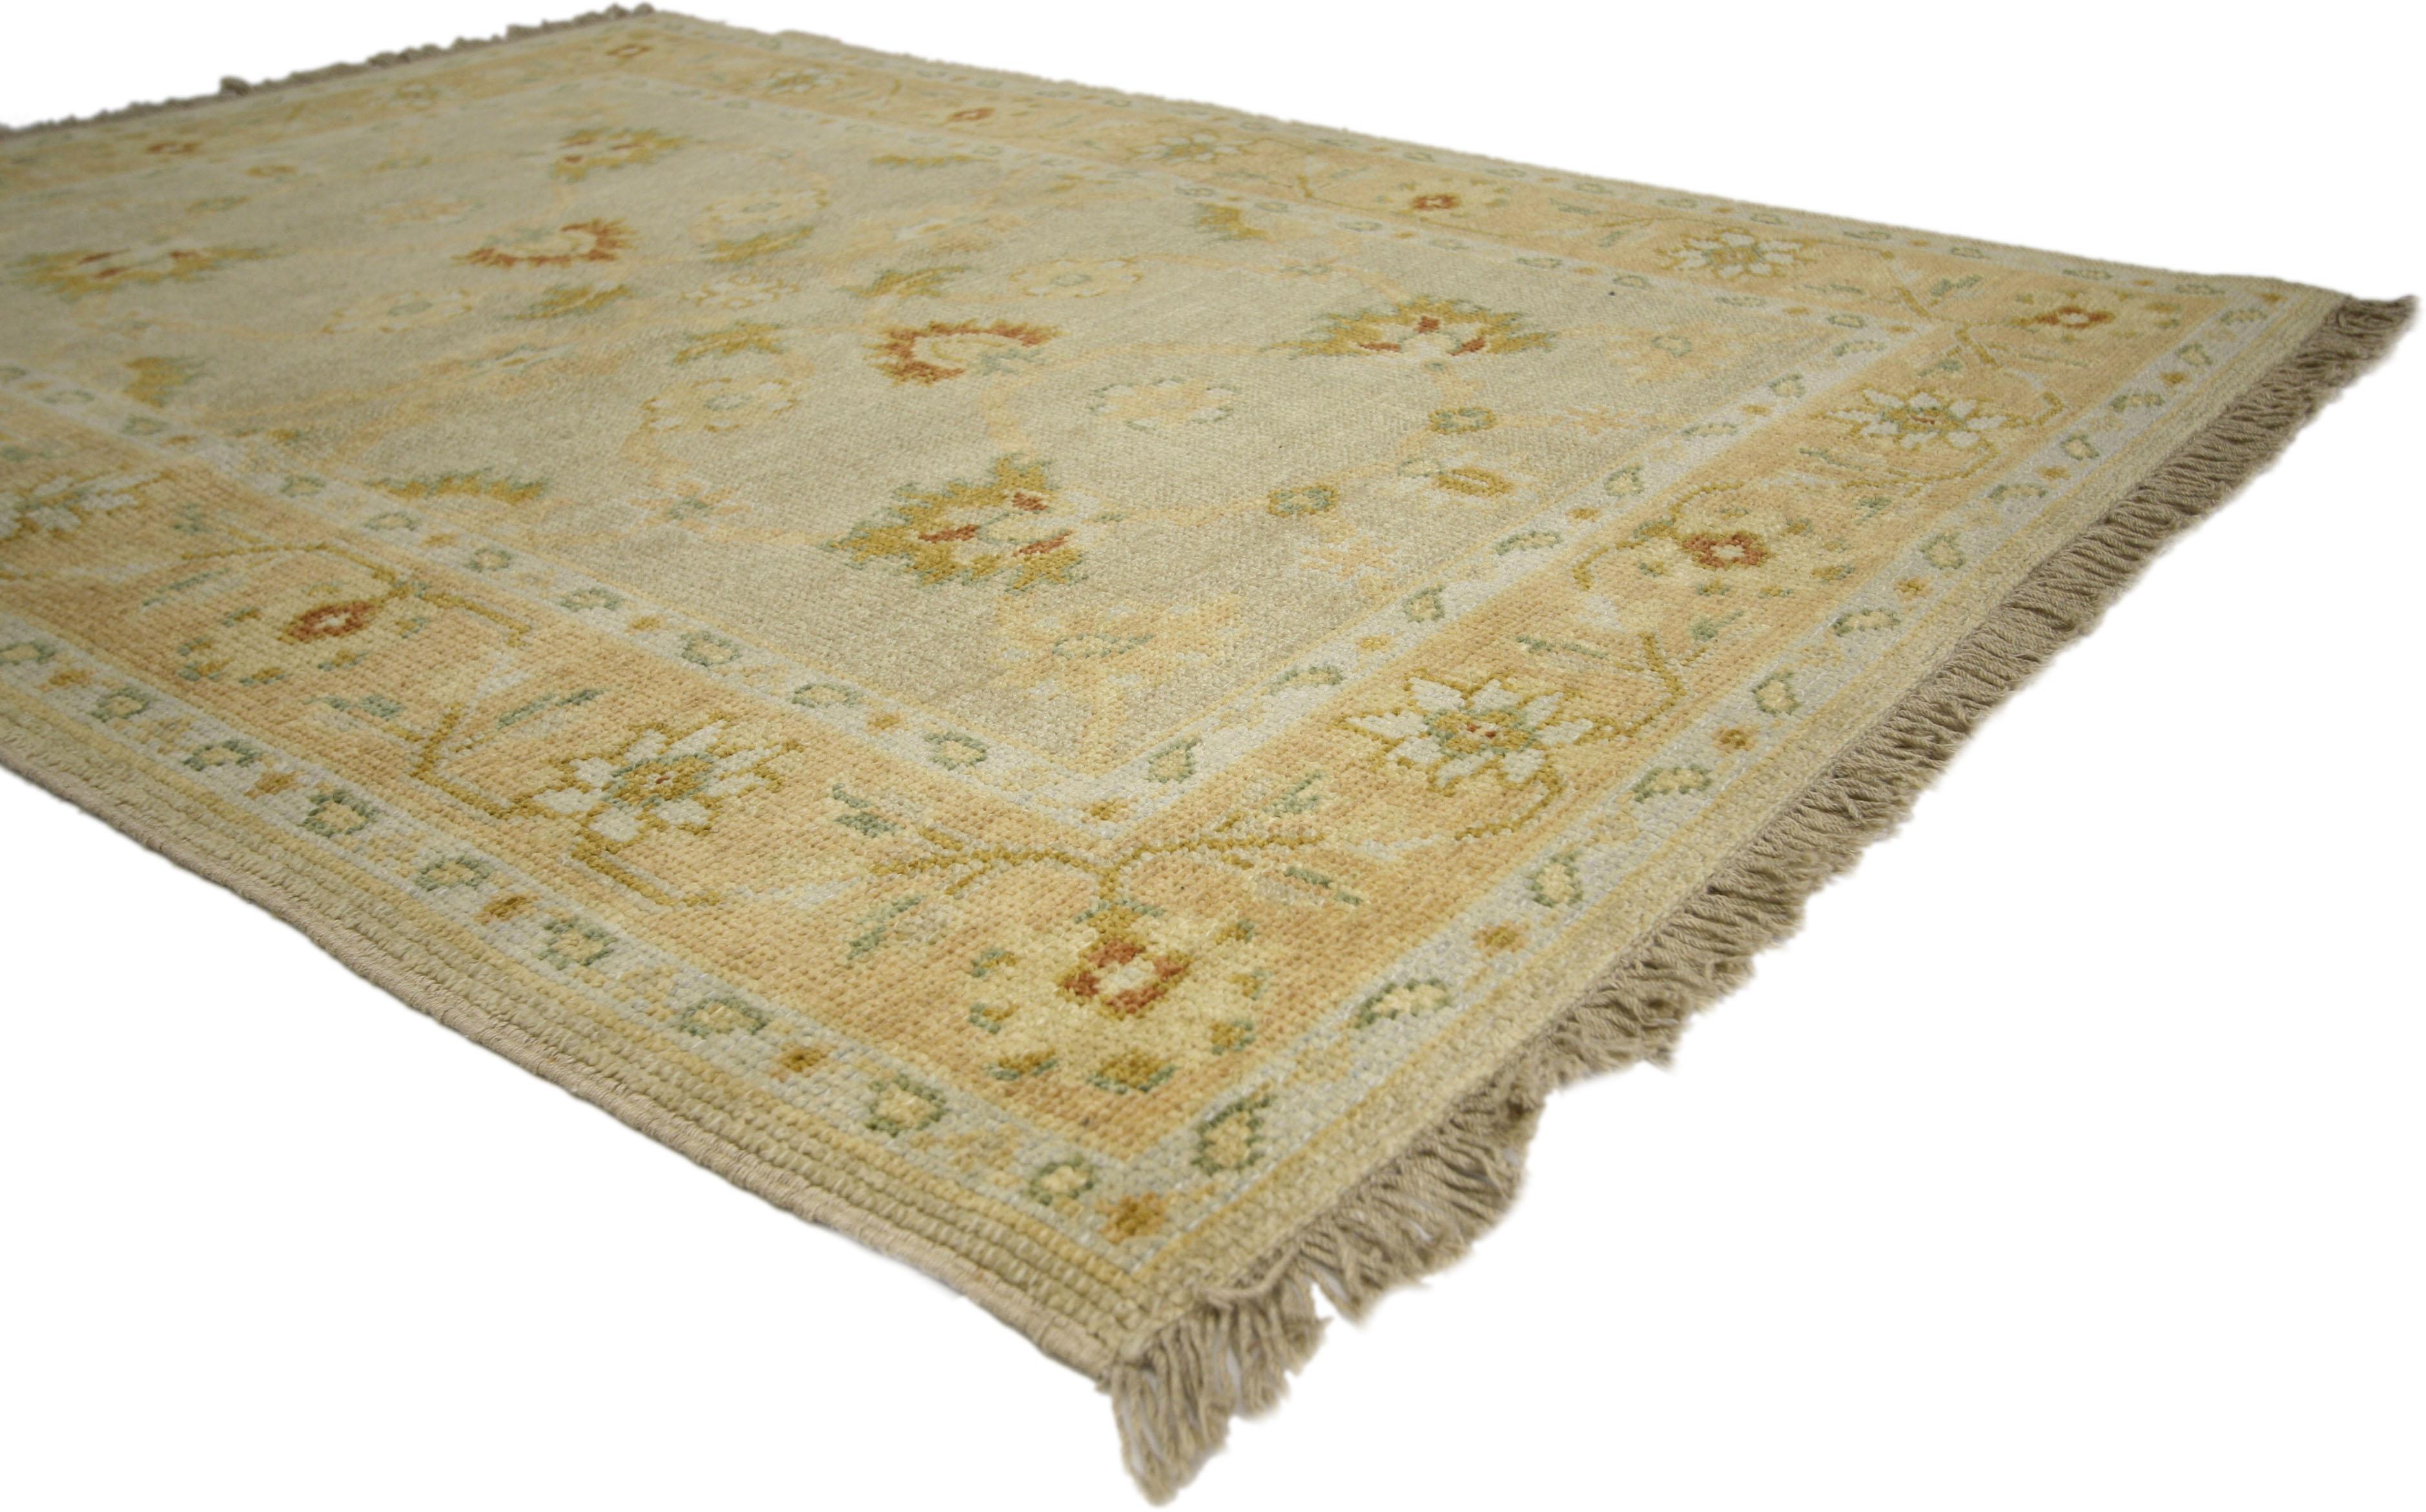 74640 vintage Persian style Garden rug, Accent rug with Georgian Queen Anne style. This hand knotted wool vintage Persian style Indian accent rug features an all-over floral lattice pattern composed of blooming lotus palmettes, stylized florals,